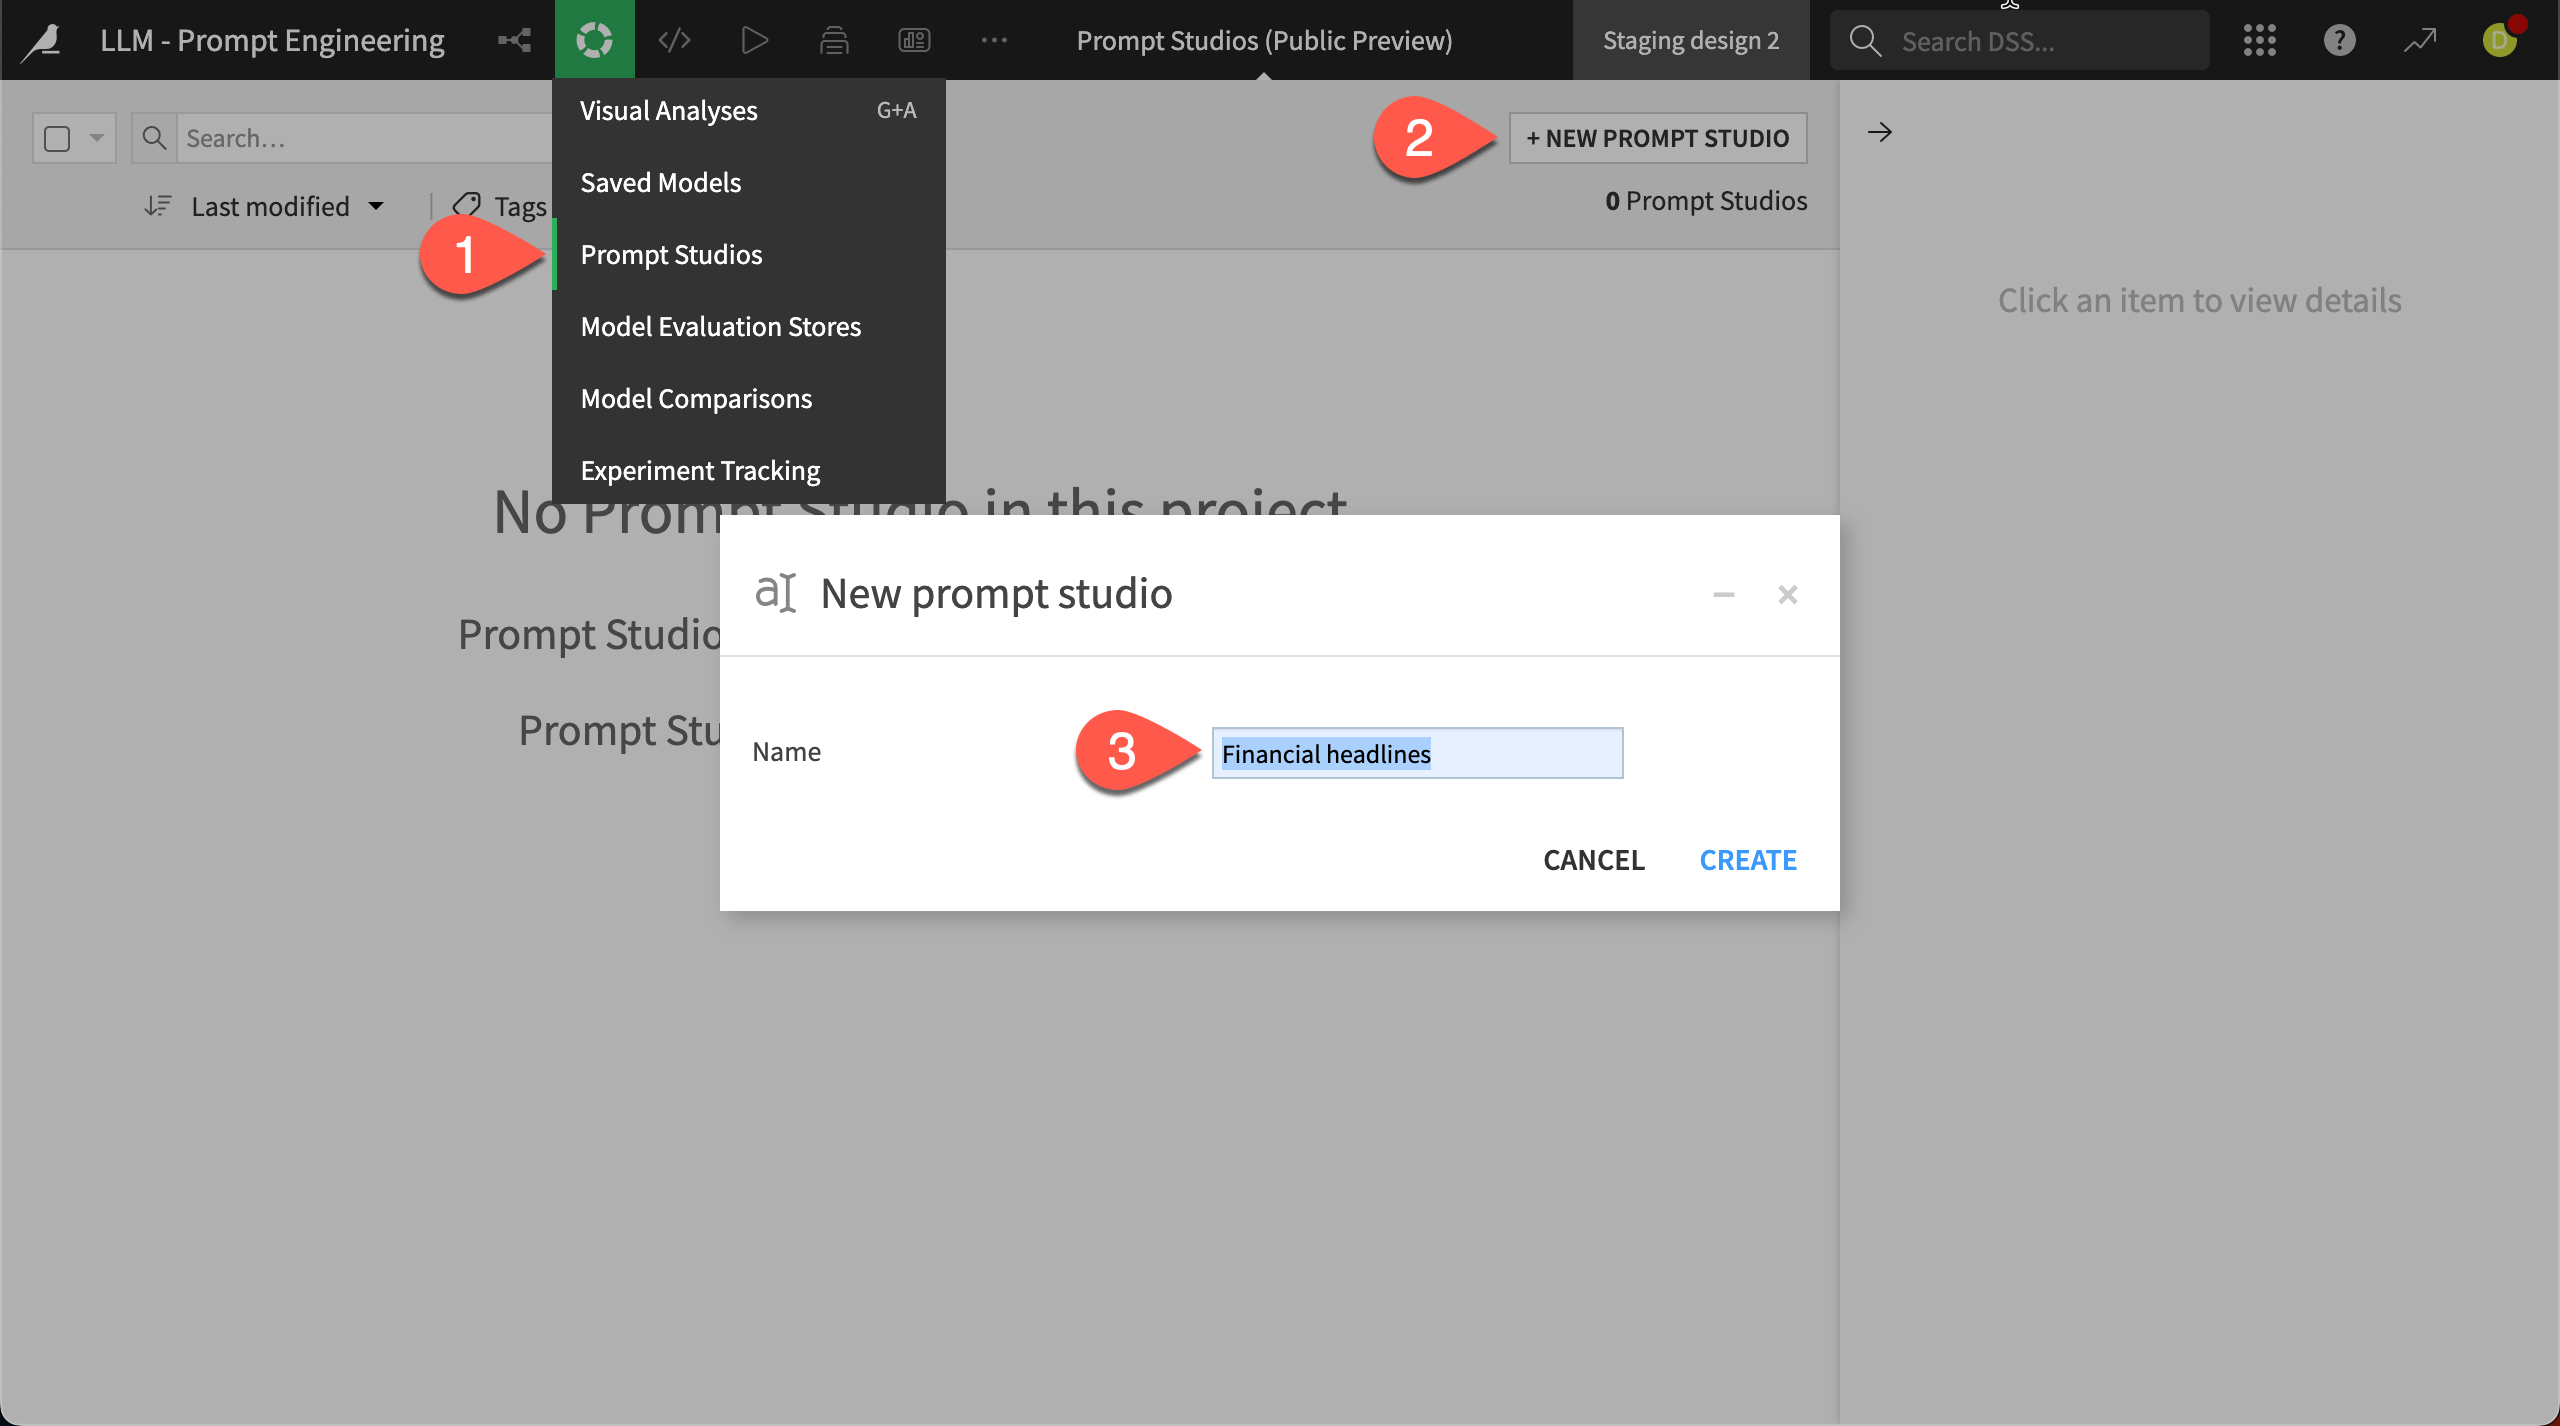 Screenshot of the steps to create a new Prompt Studio.